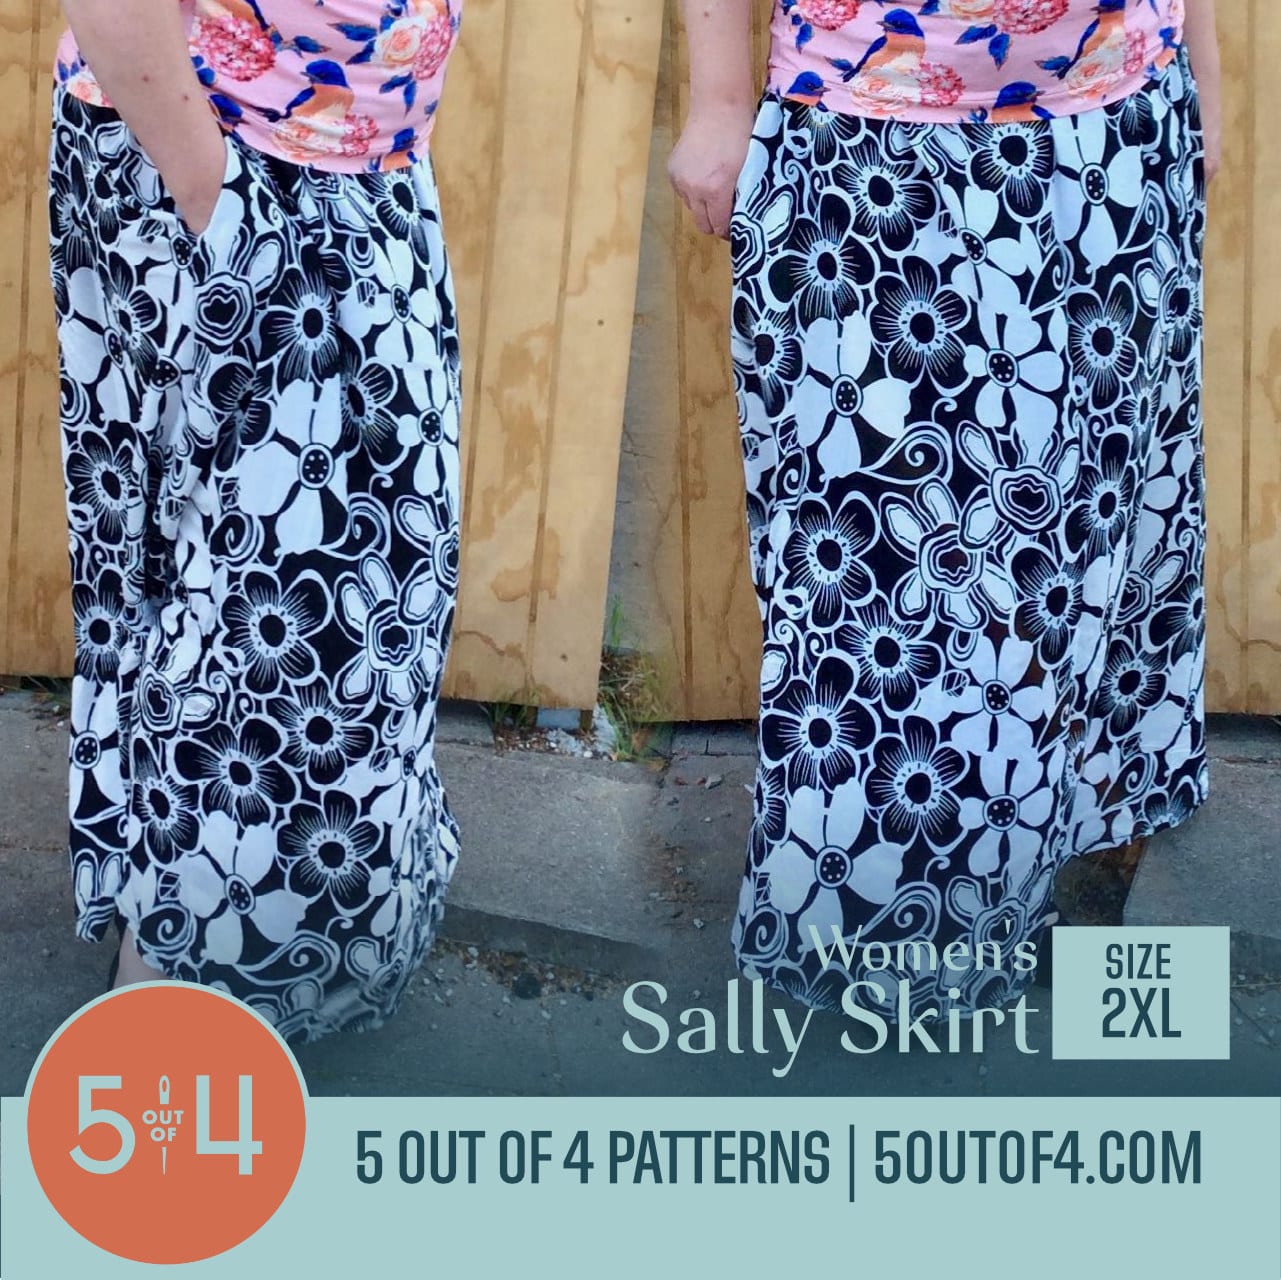 Women's Sally Skirt - 5 out of 4 Patterns